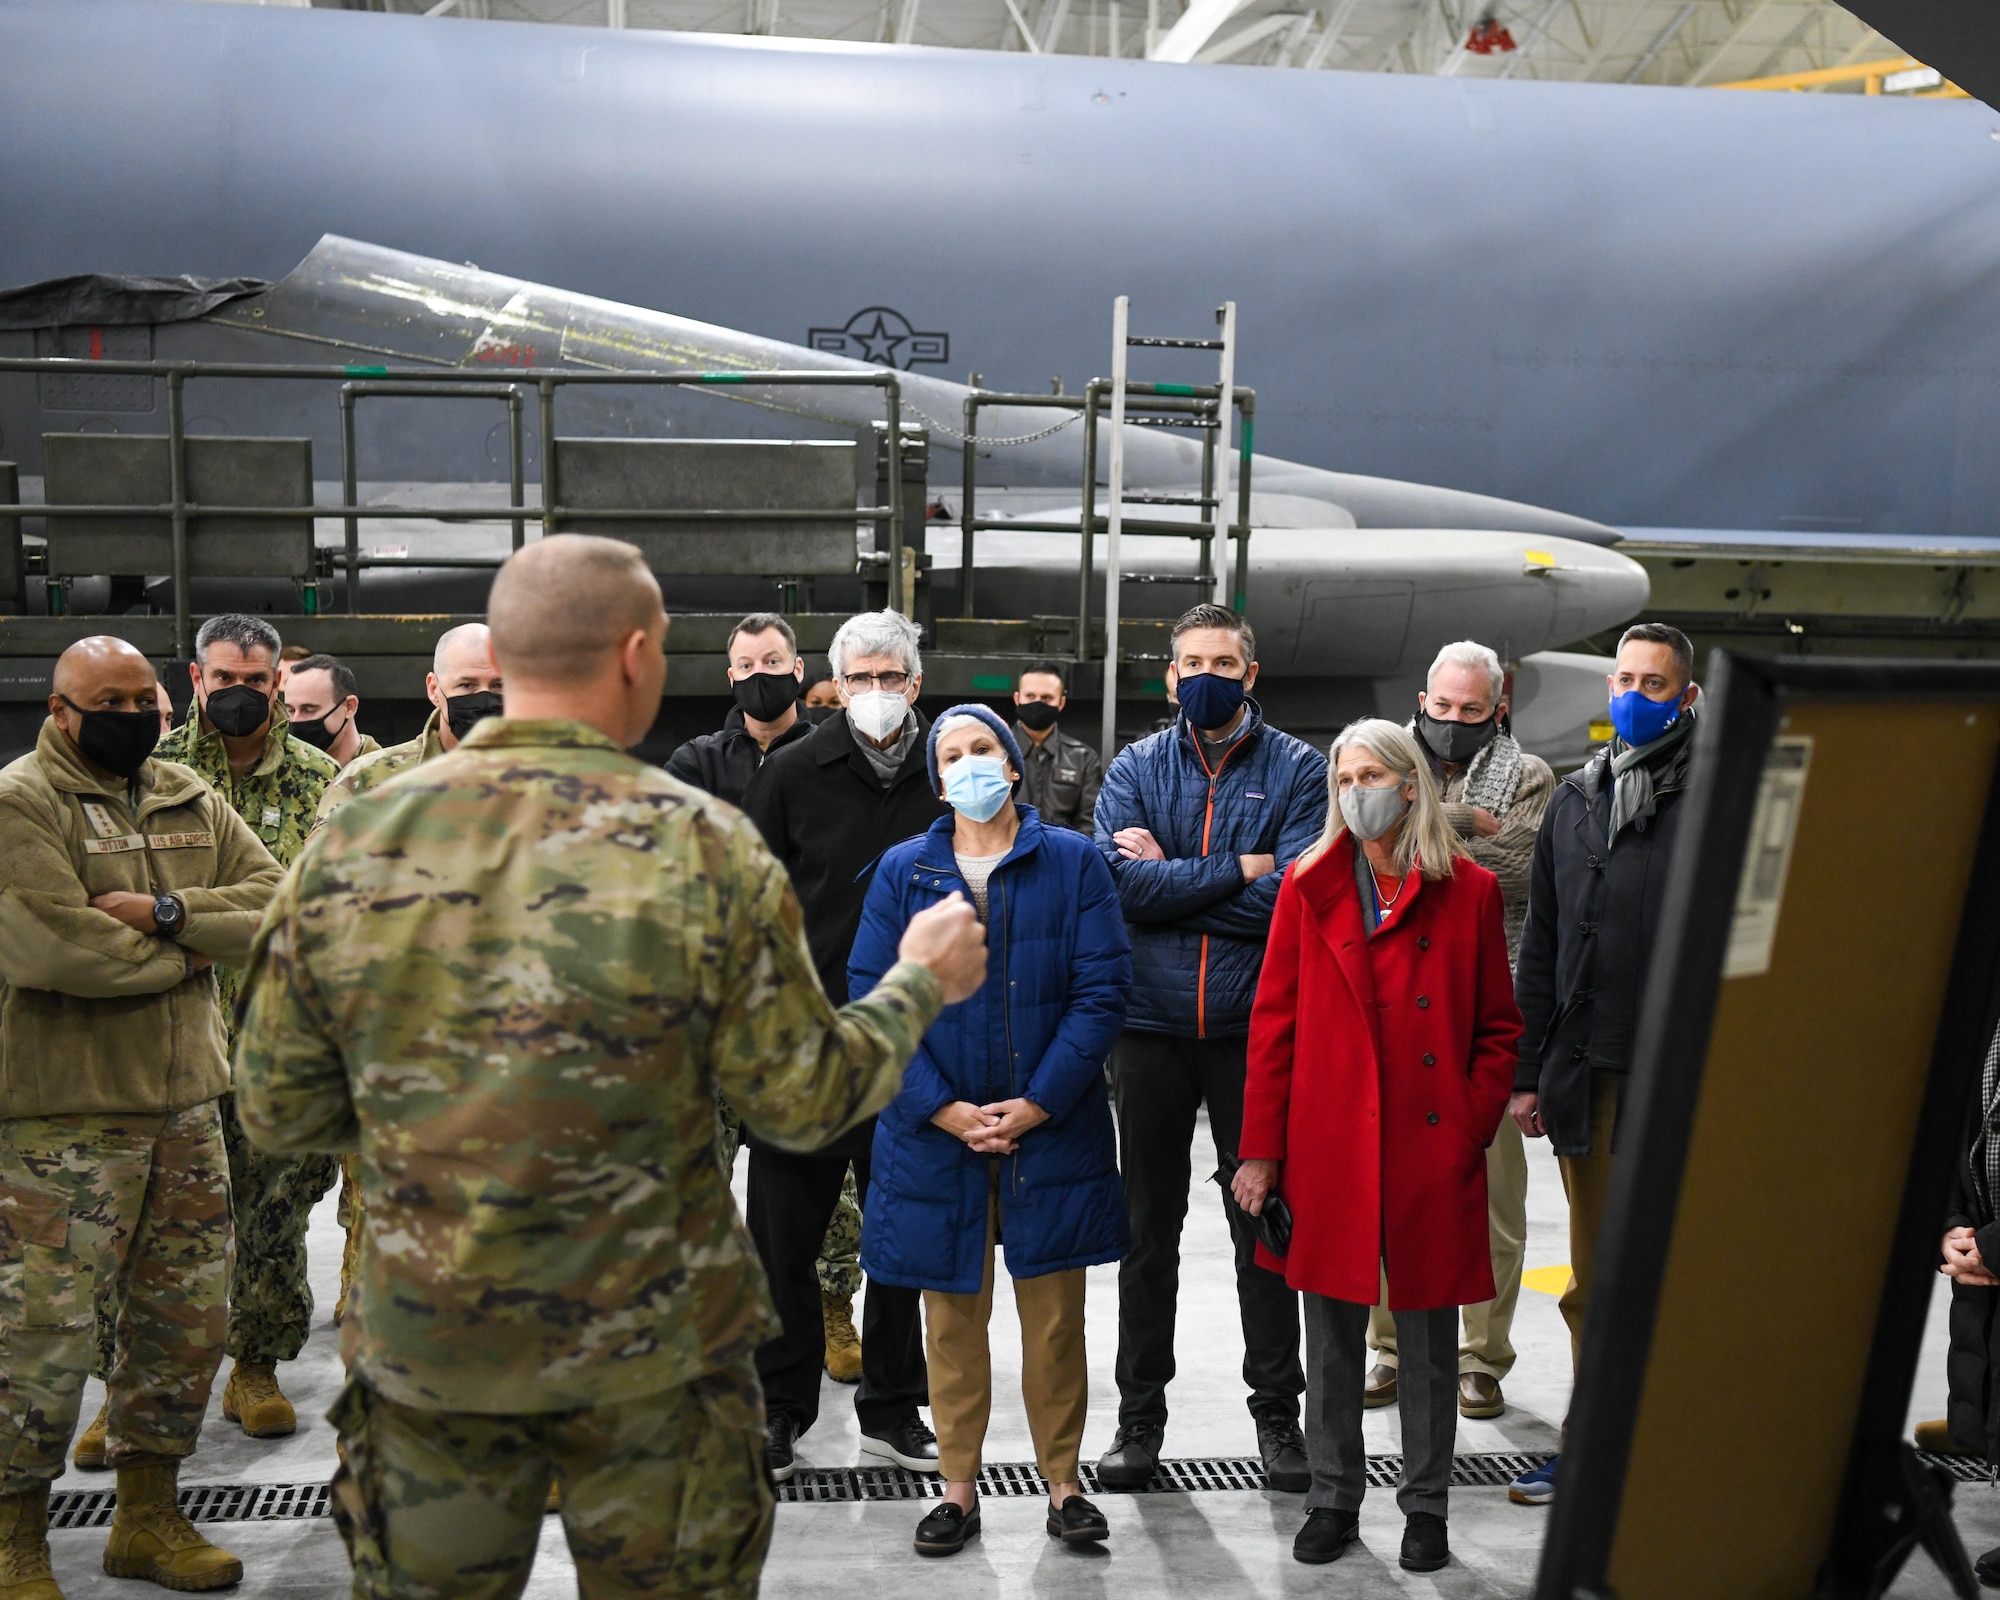 Members of the Nuclear Weapons Council (NWC) tour a B-52H Stratofortress with Team Minot leadership at Minot Air Force Base, N.D., Nov. 17, 2021. The NWC’s efforts to further modernize the United States’ nuclear arsenal play an essential role in maintaining the nation’s nuclear deterrence. (U.S. Air Force photo by Airman 1st Class Evan Lichtenhan)